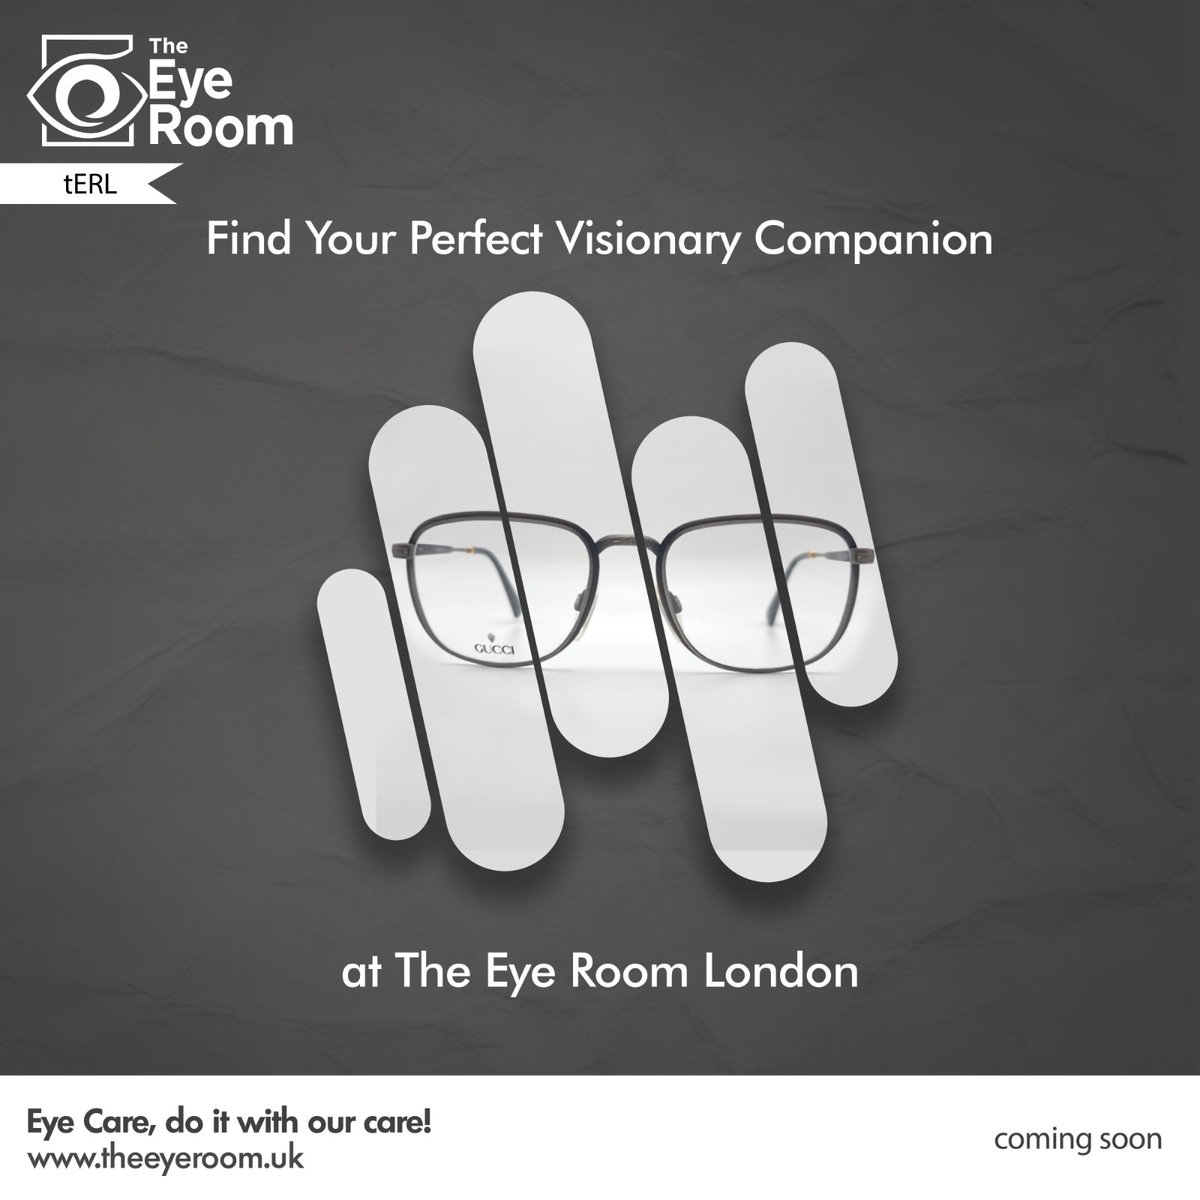 Find Your Perfect Visionary Companion at The Eye Room London
-
-
-
📍Location : THE EYE ROOM-LONDON, United Kingdom
-
-
-
-
-
#EyeRoomExcellenceMattes #VisionaryOptometry #ClearEyesBrightFuture #EyeCareInnovation #VisionaryCompanion #EyeCare #Eyewear #LondonFashion #OpticalStore